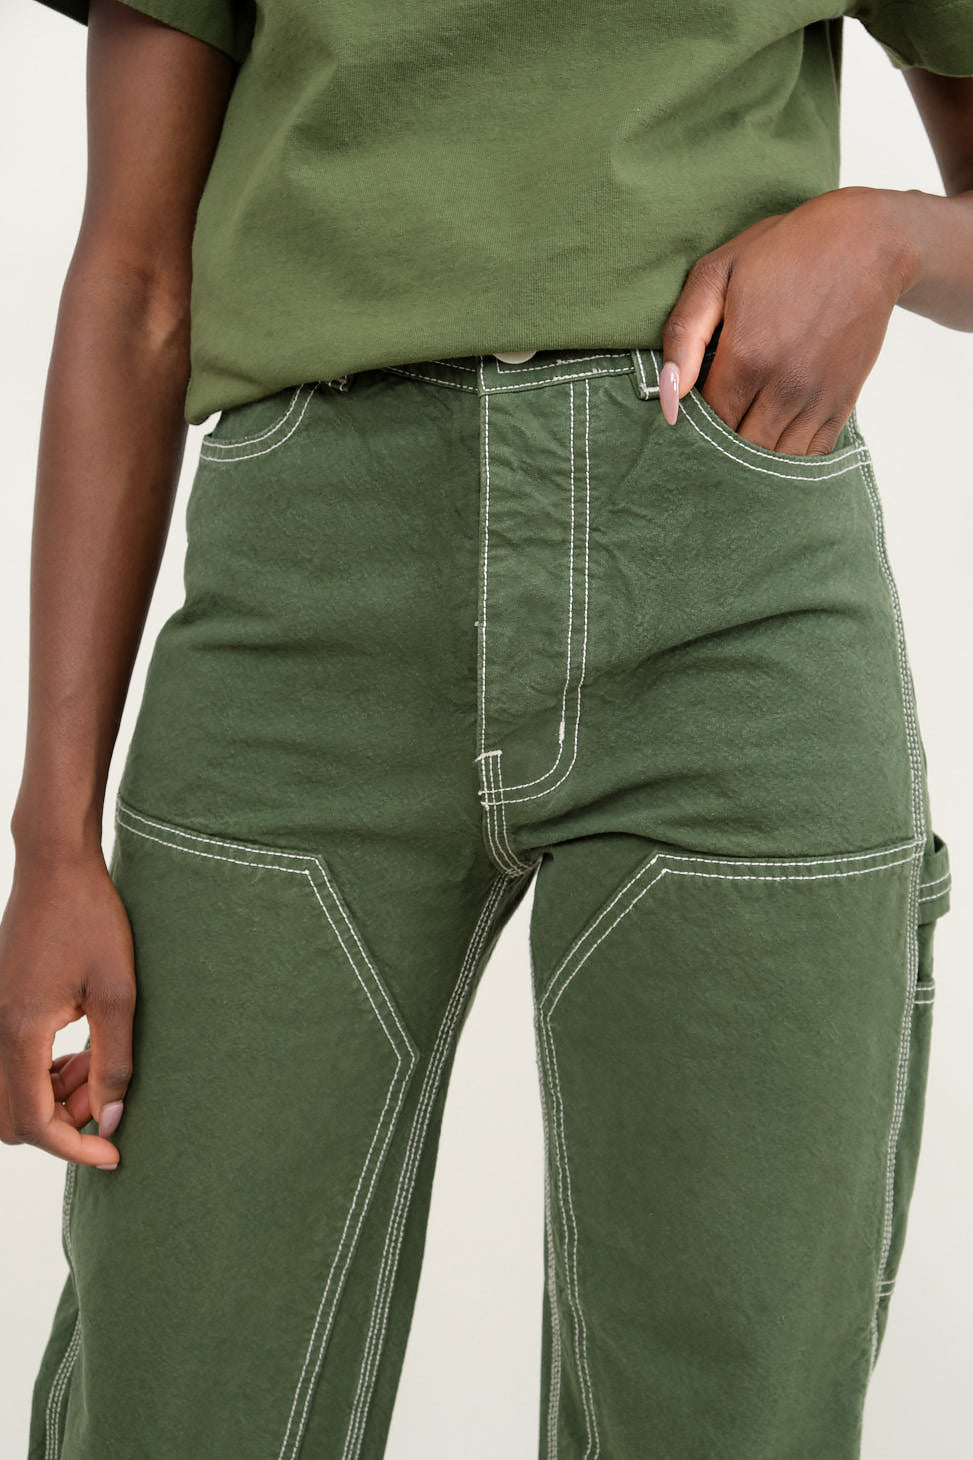 Front detailing on Patchfront Handy Pant in Olive/Natural Stitch